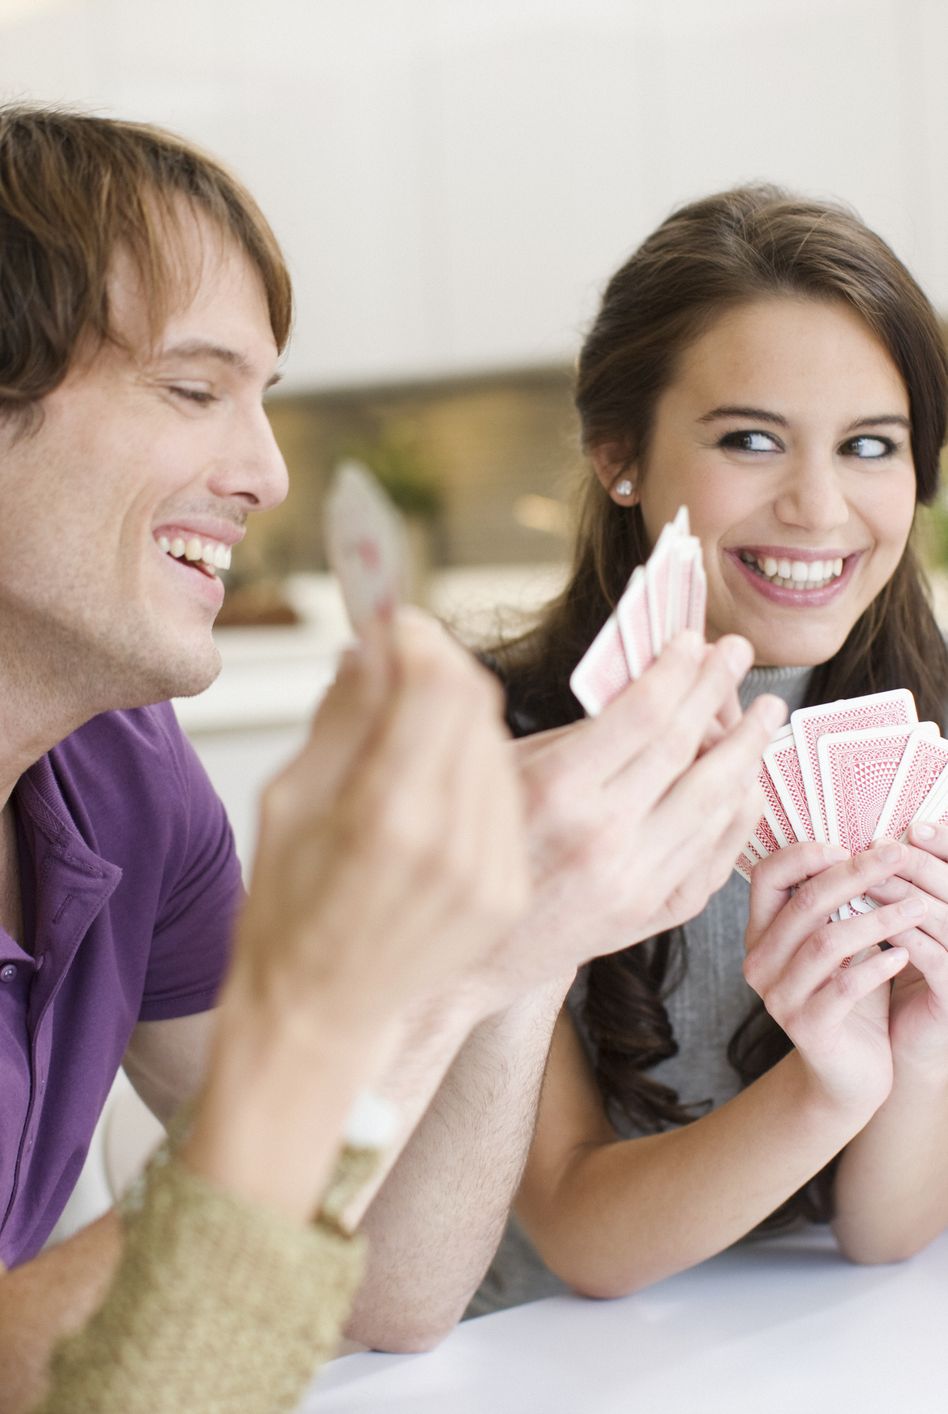 20 best house party games for adults